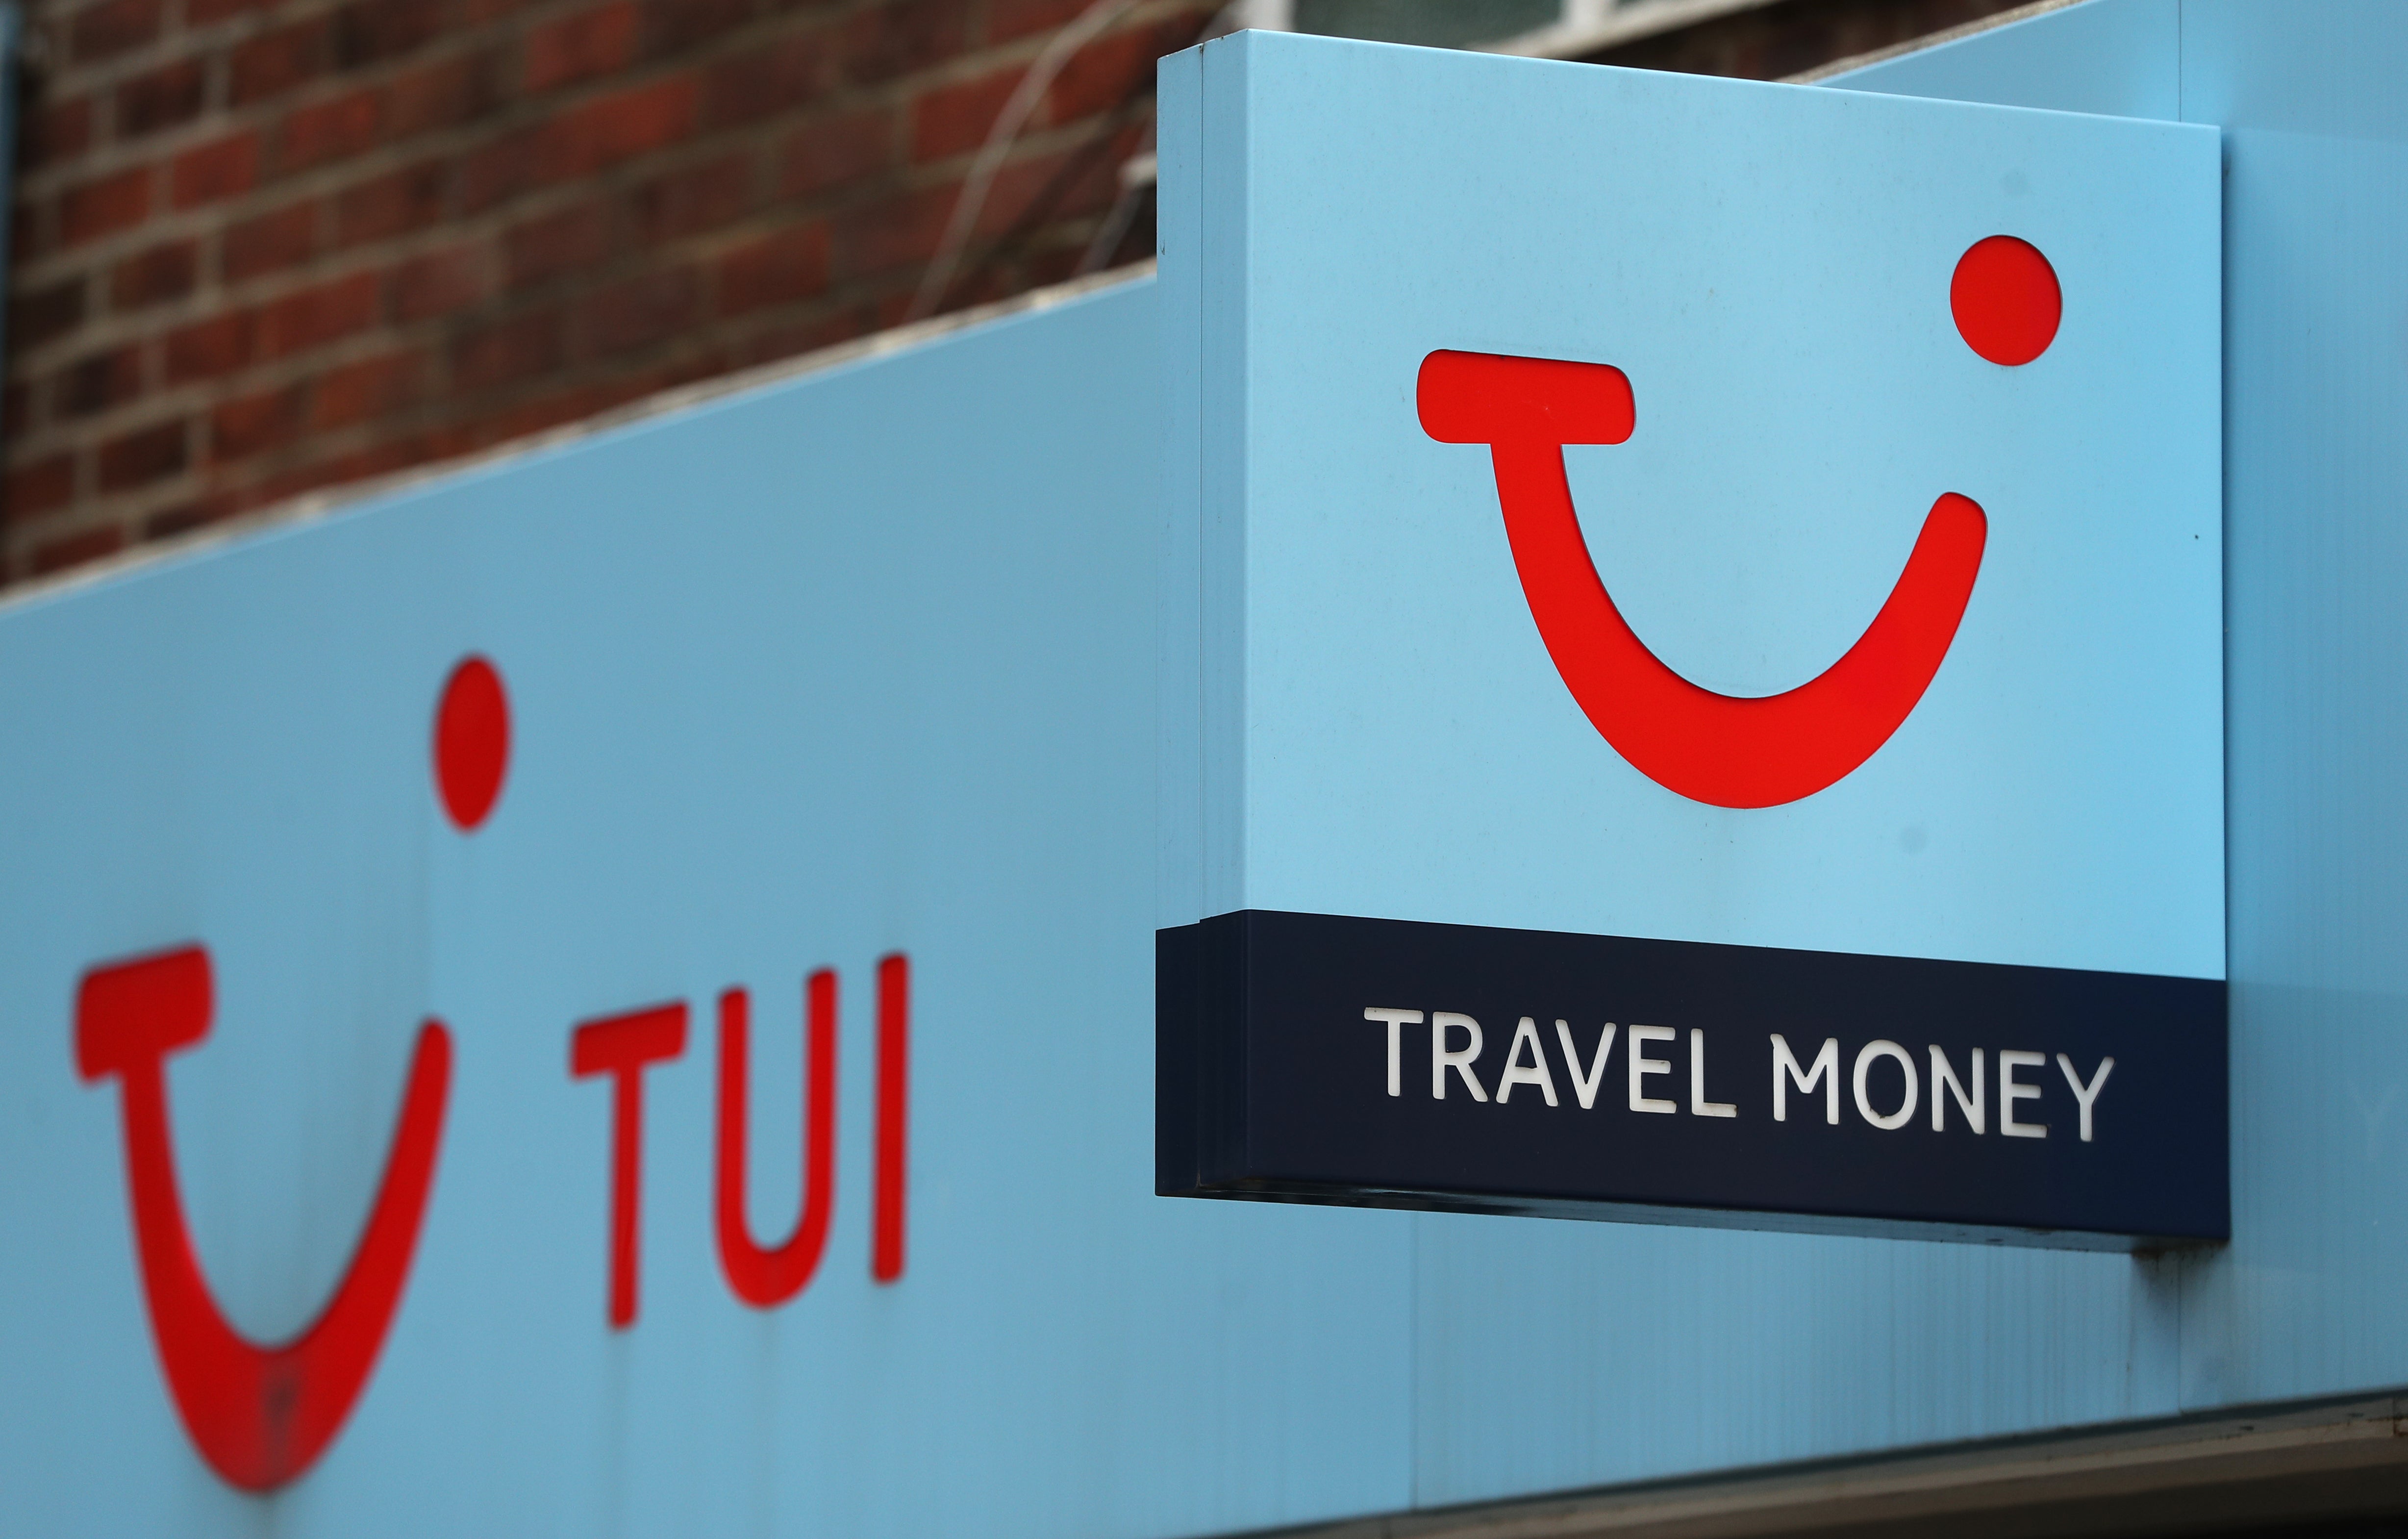 Holiday giant Tui has said it hopes bookings for next summer will rebound close to levels seen before the pandemic next summer (Andrew Matthews/PA)